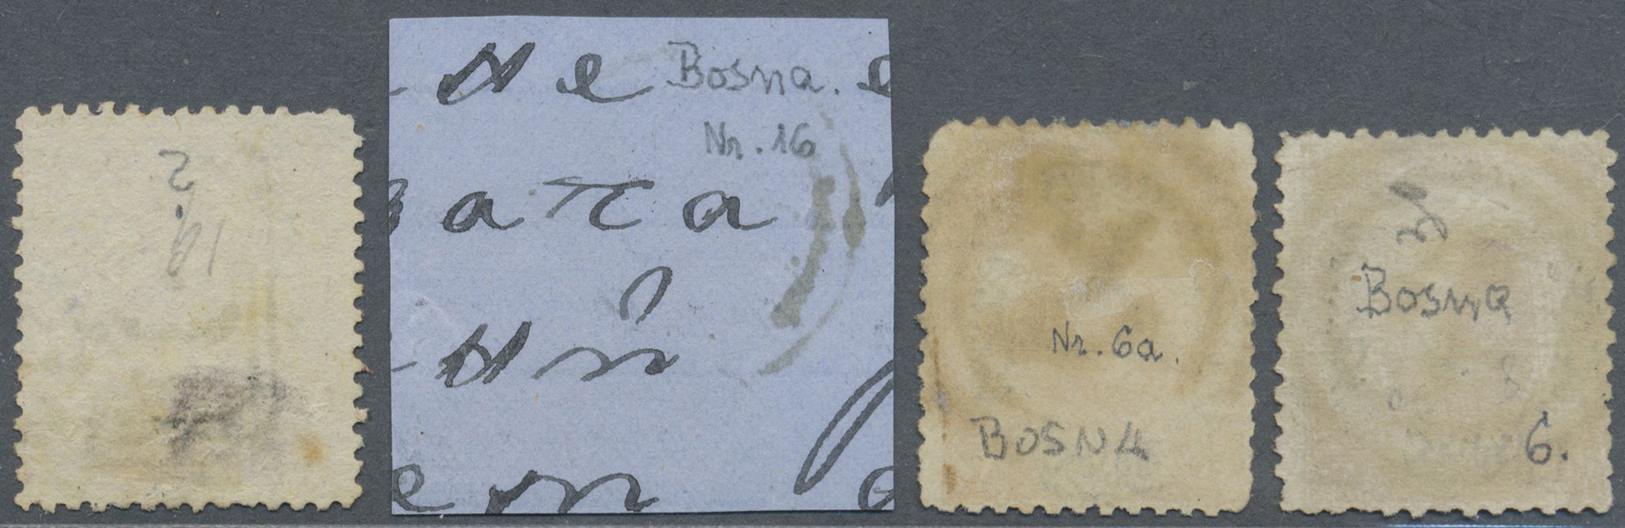 Brrst/O Bosnien Und Herzegowina: 1865-70, "BOSNA 81" On Two 1865 20 Pa. Yellow And Orange, 2 Pia. On Piece And 10 Pa. - Bosnie-Herzegovine